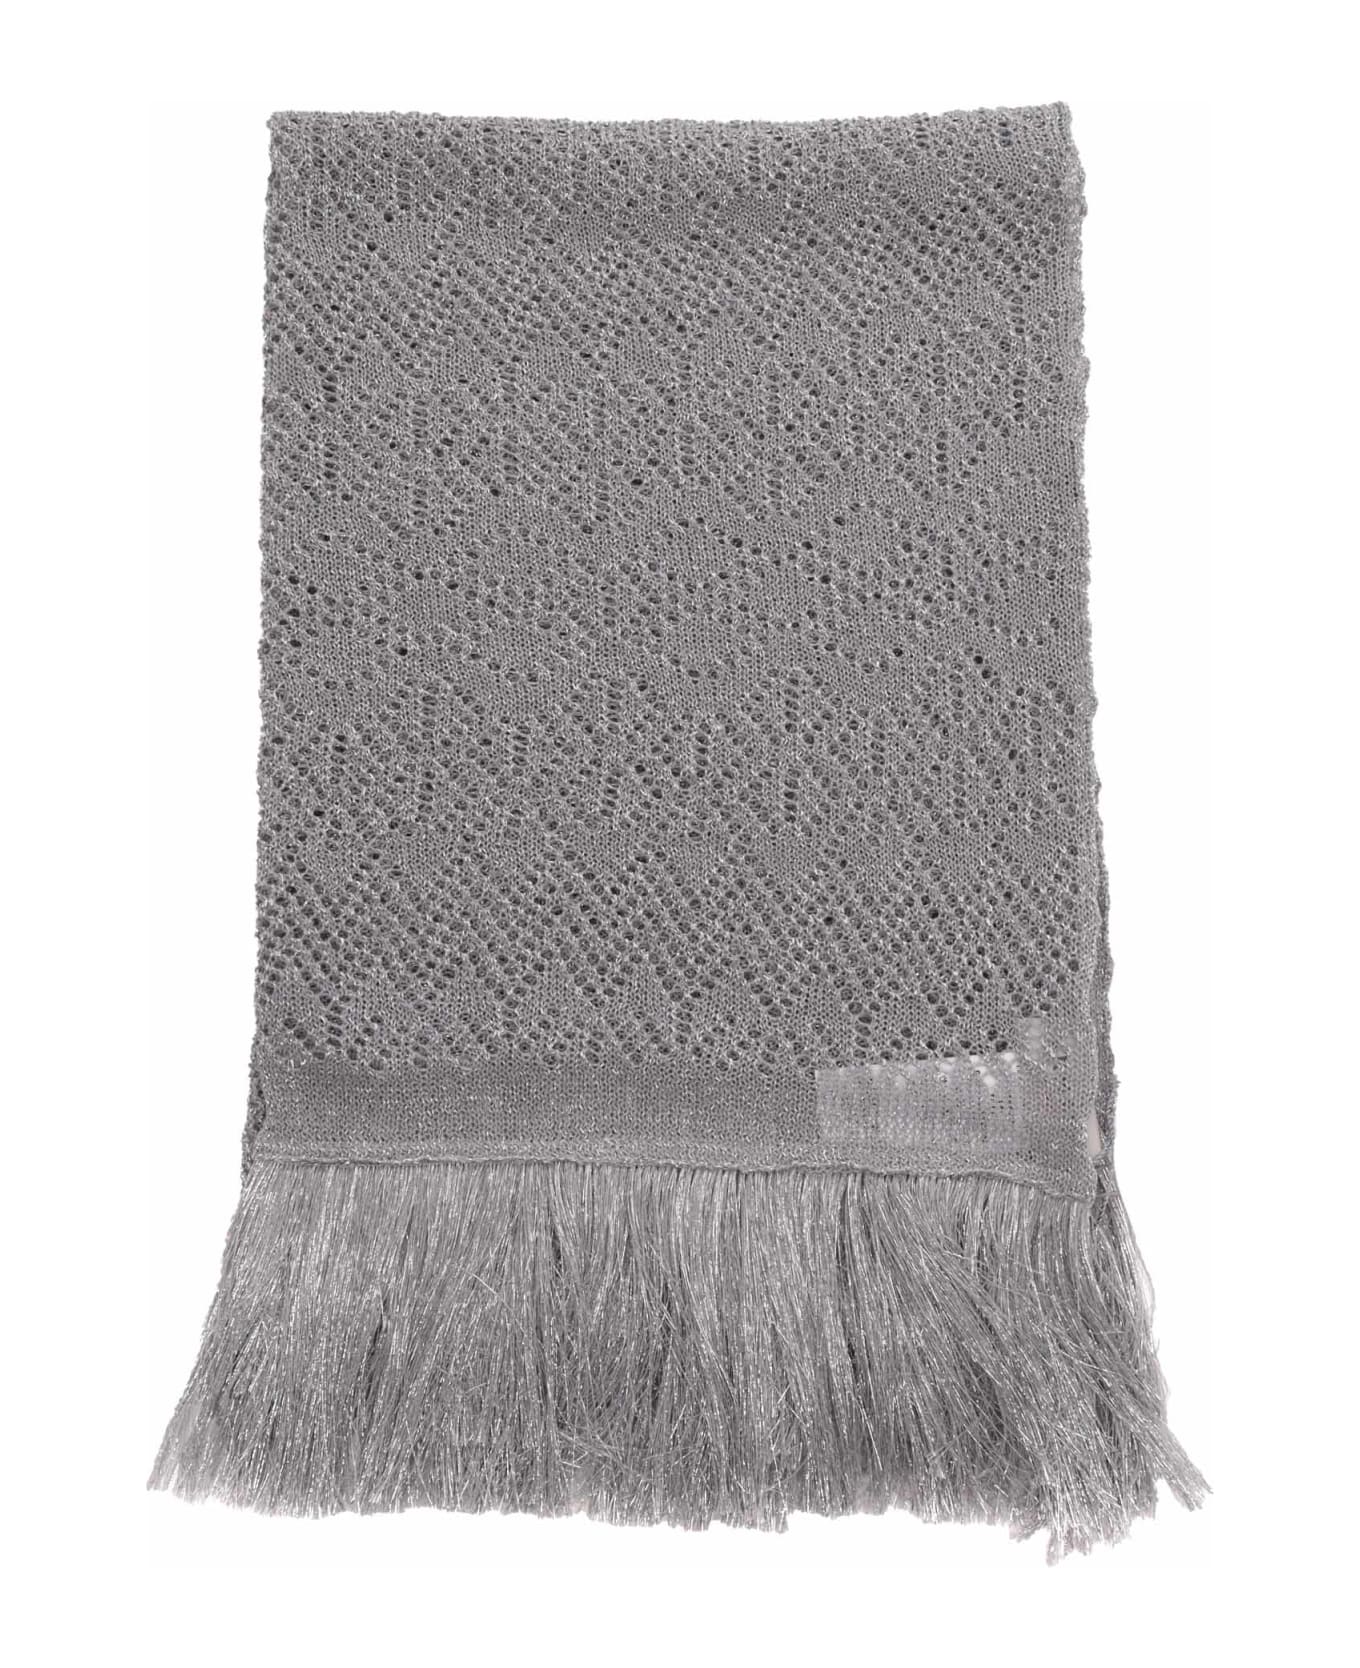 Ermanno Ermanno Scervino Silver Scarf With Fringes - SILVER コート